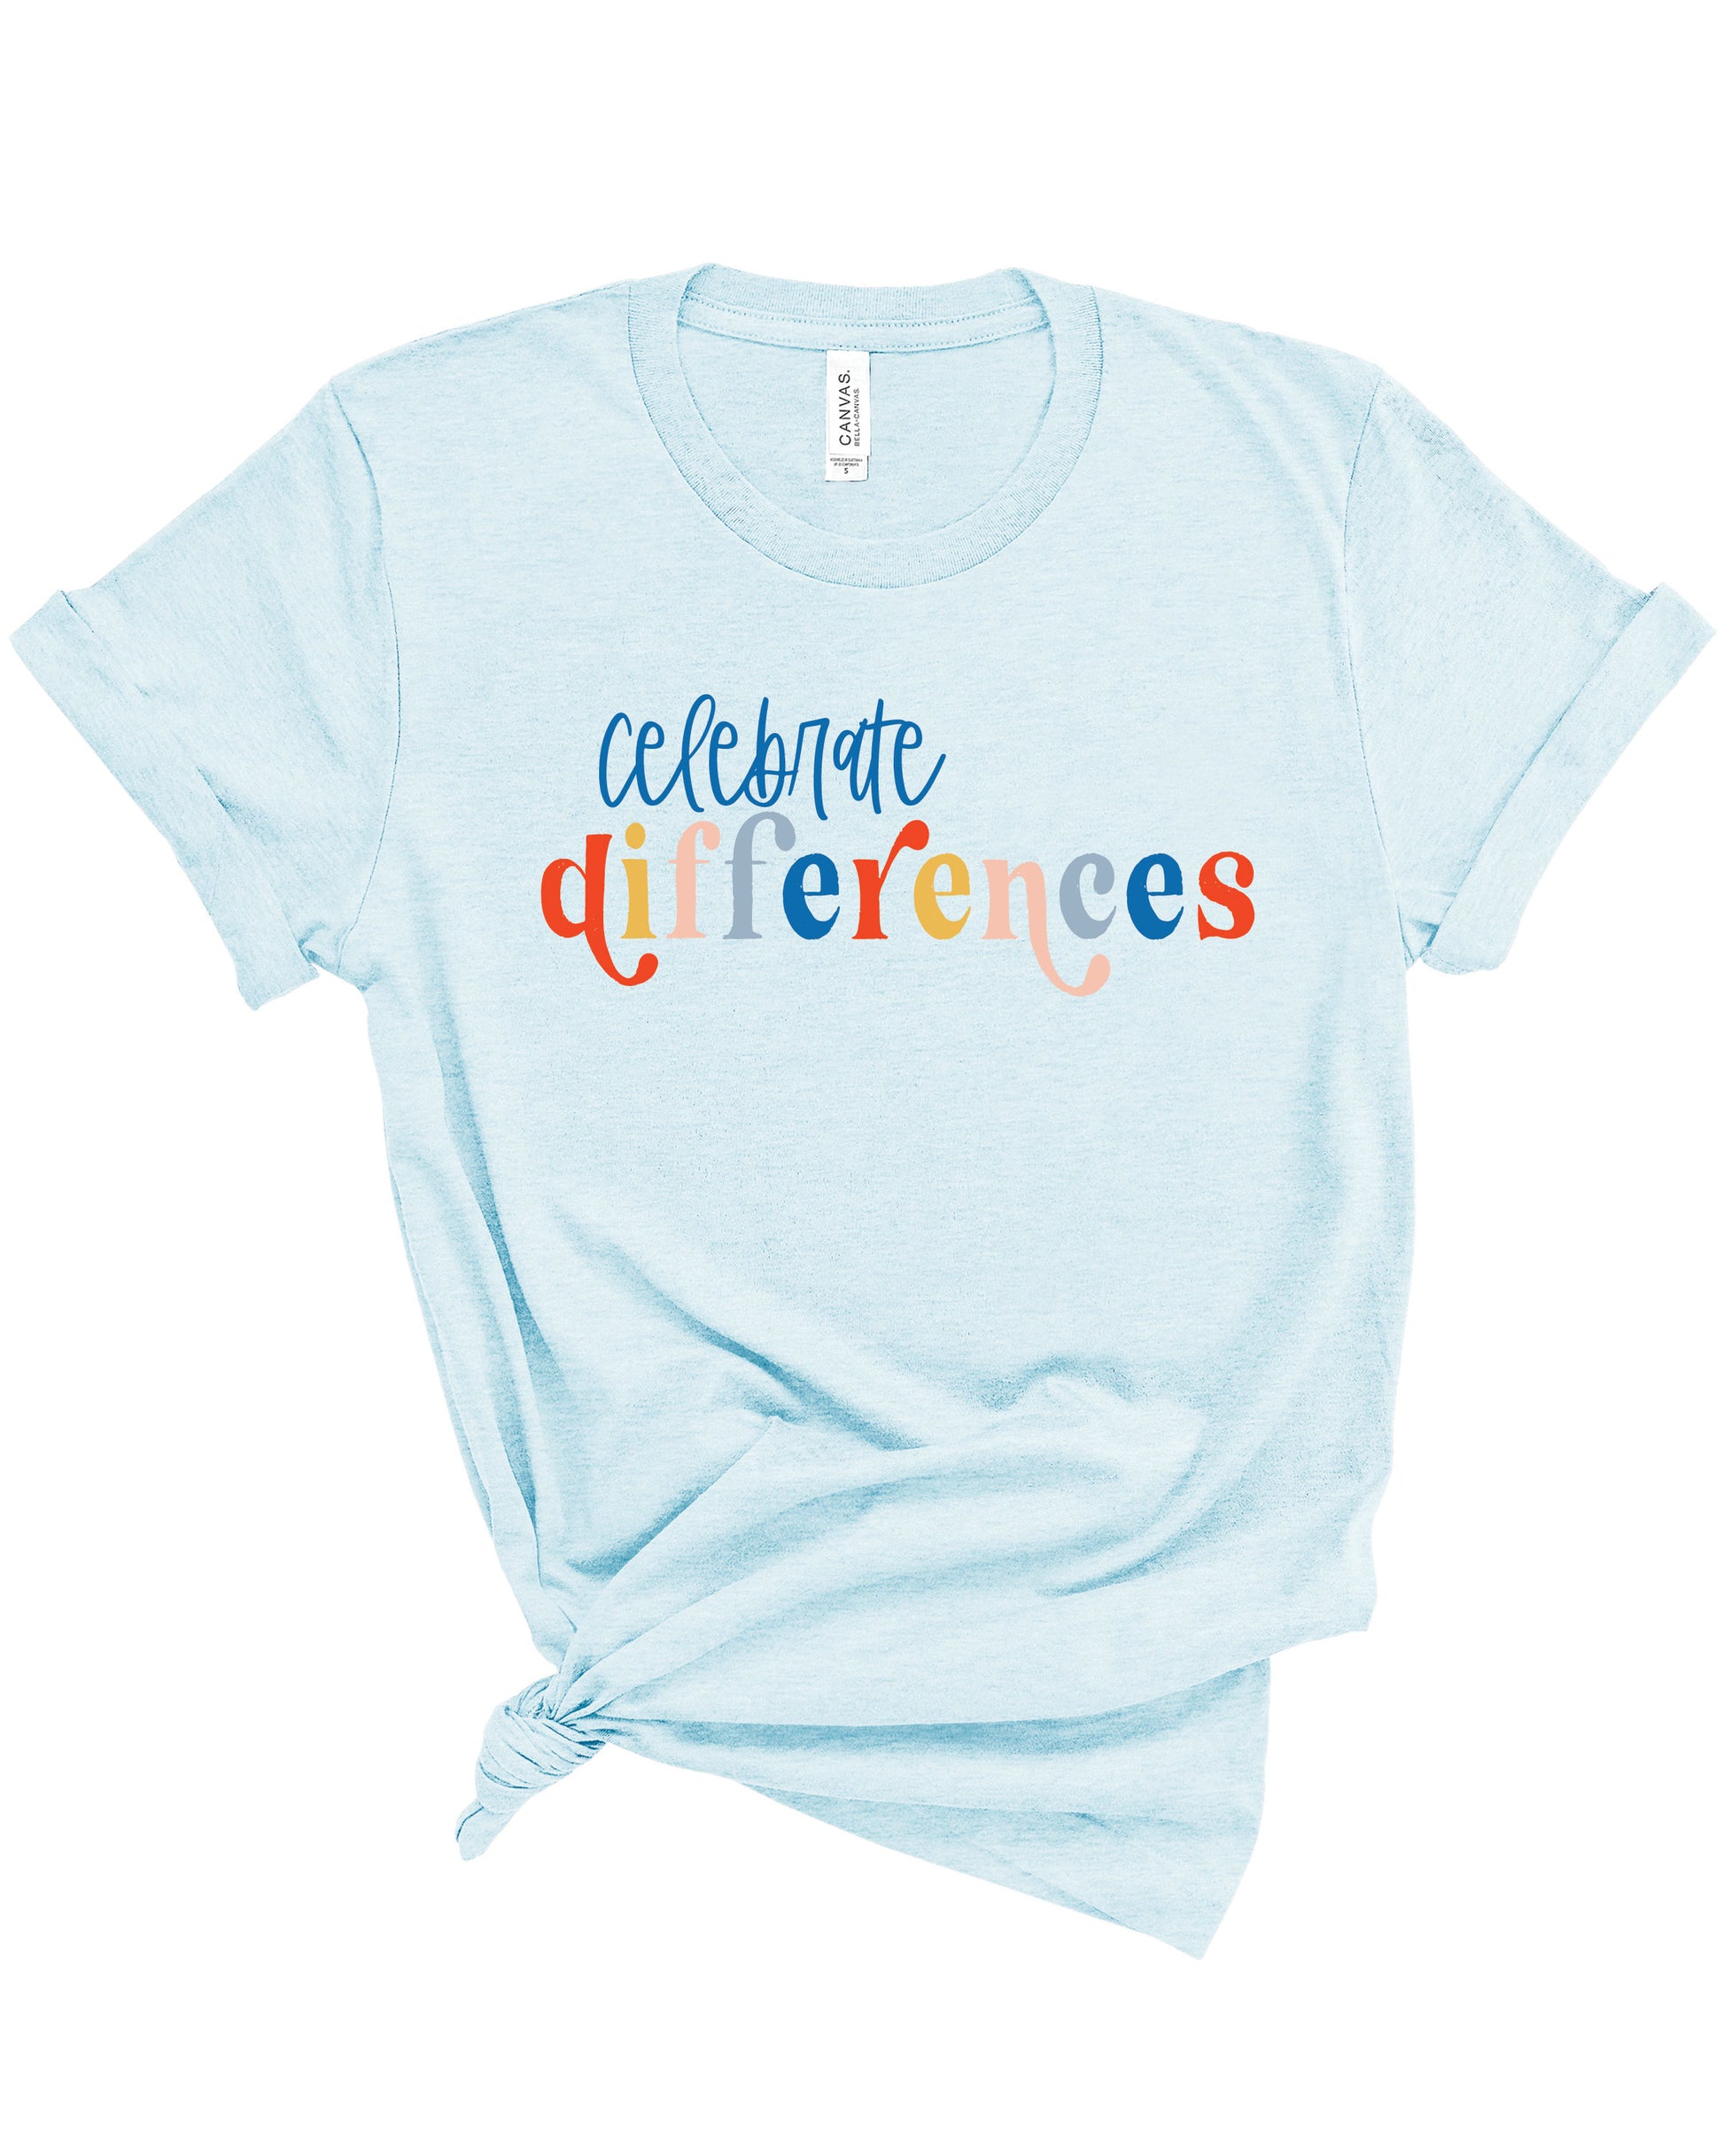 Celebrate Differences | Tee | Adult-Sister Shirts-Sister Shirts, Cute & Custom Tees for Mama & Littles in Trussville, Alabama.